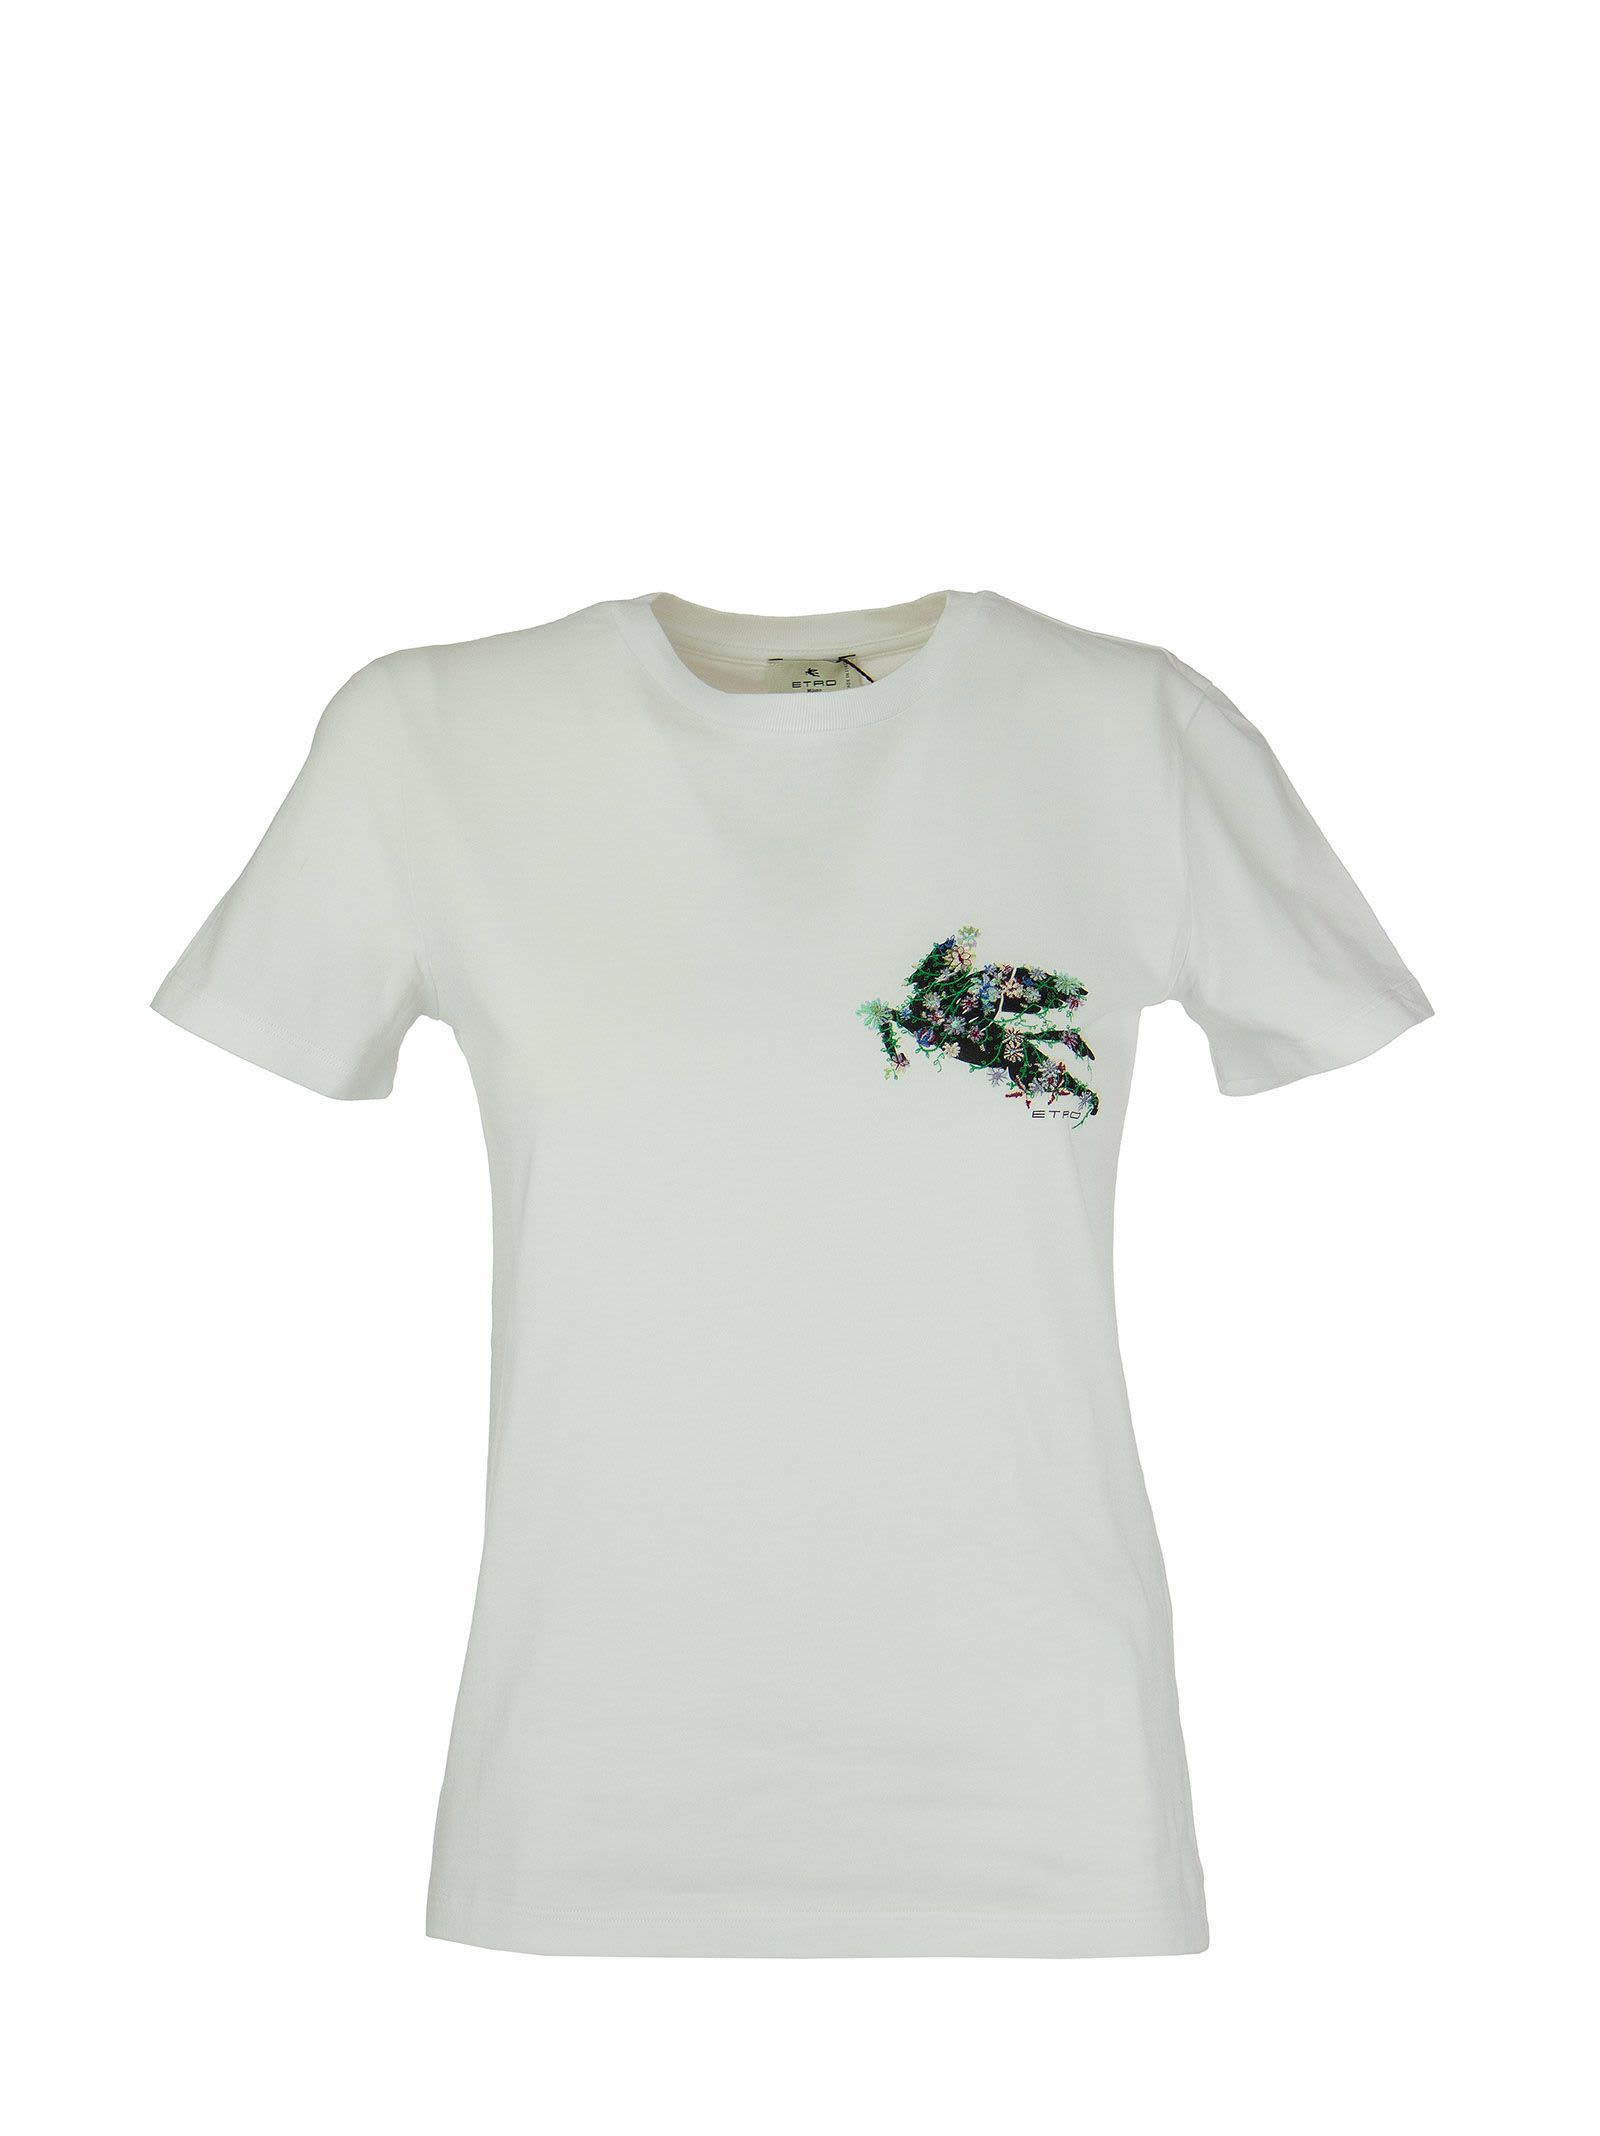 ETRO T-SHIRT WITH EMBROIDERED PEGAGO WHITE,14514 7957 990